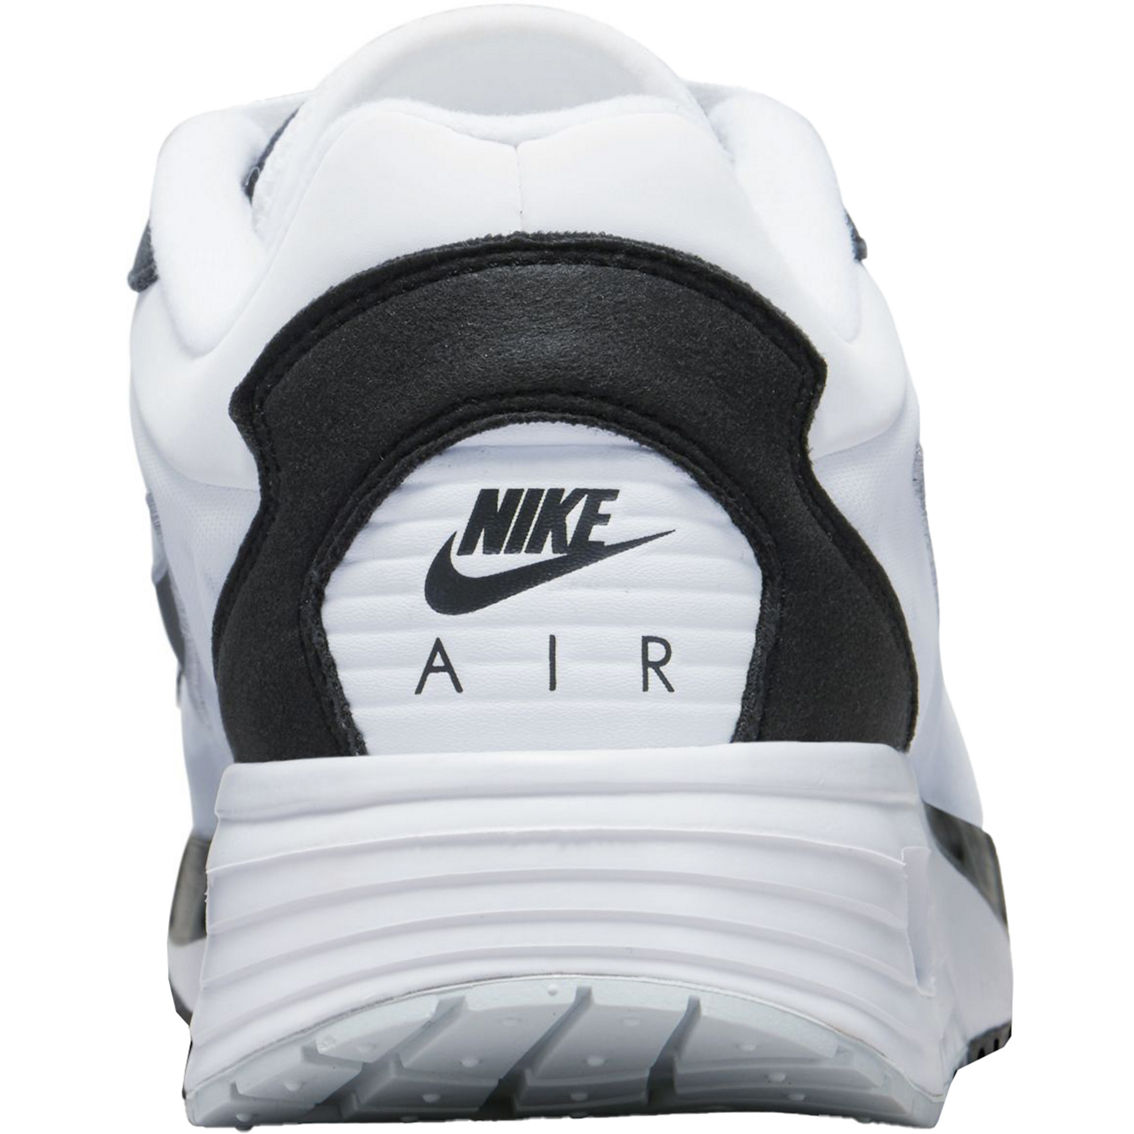 Nike Men's Air Max Solo Running Shoes - Image 6 of 10